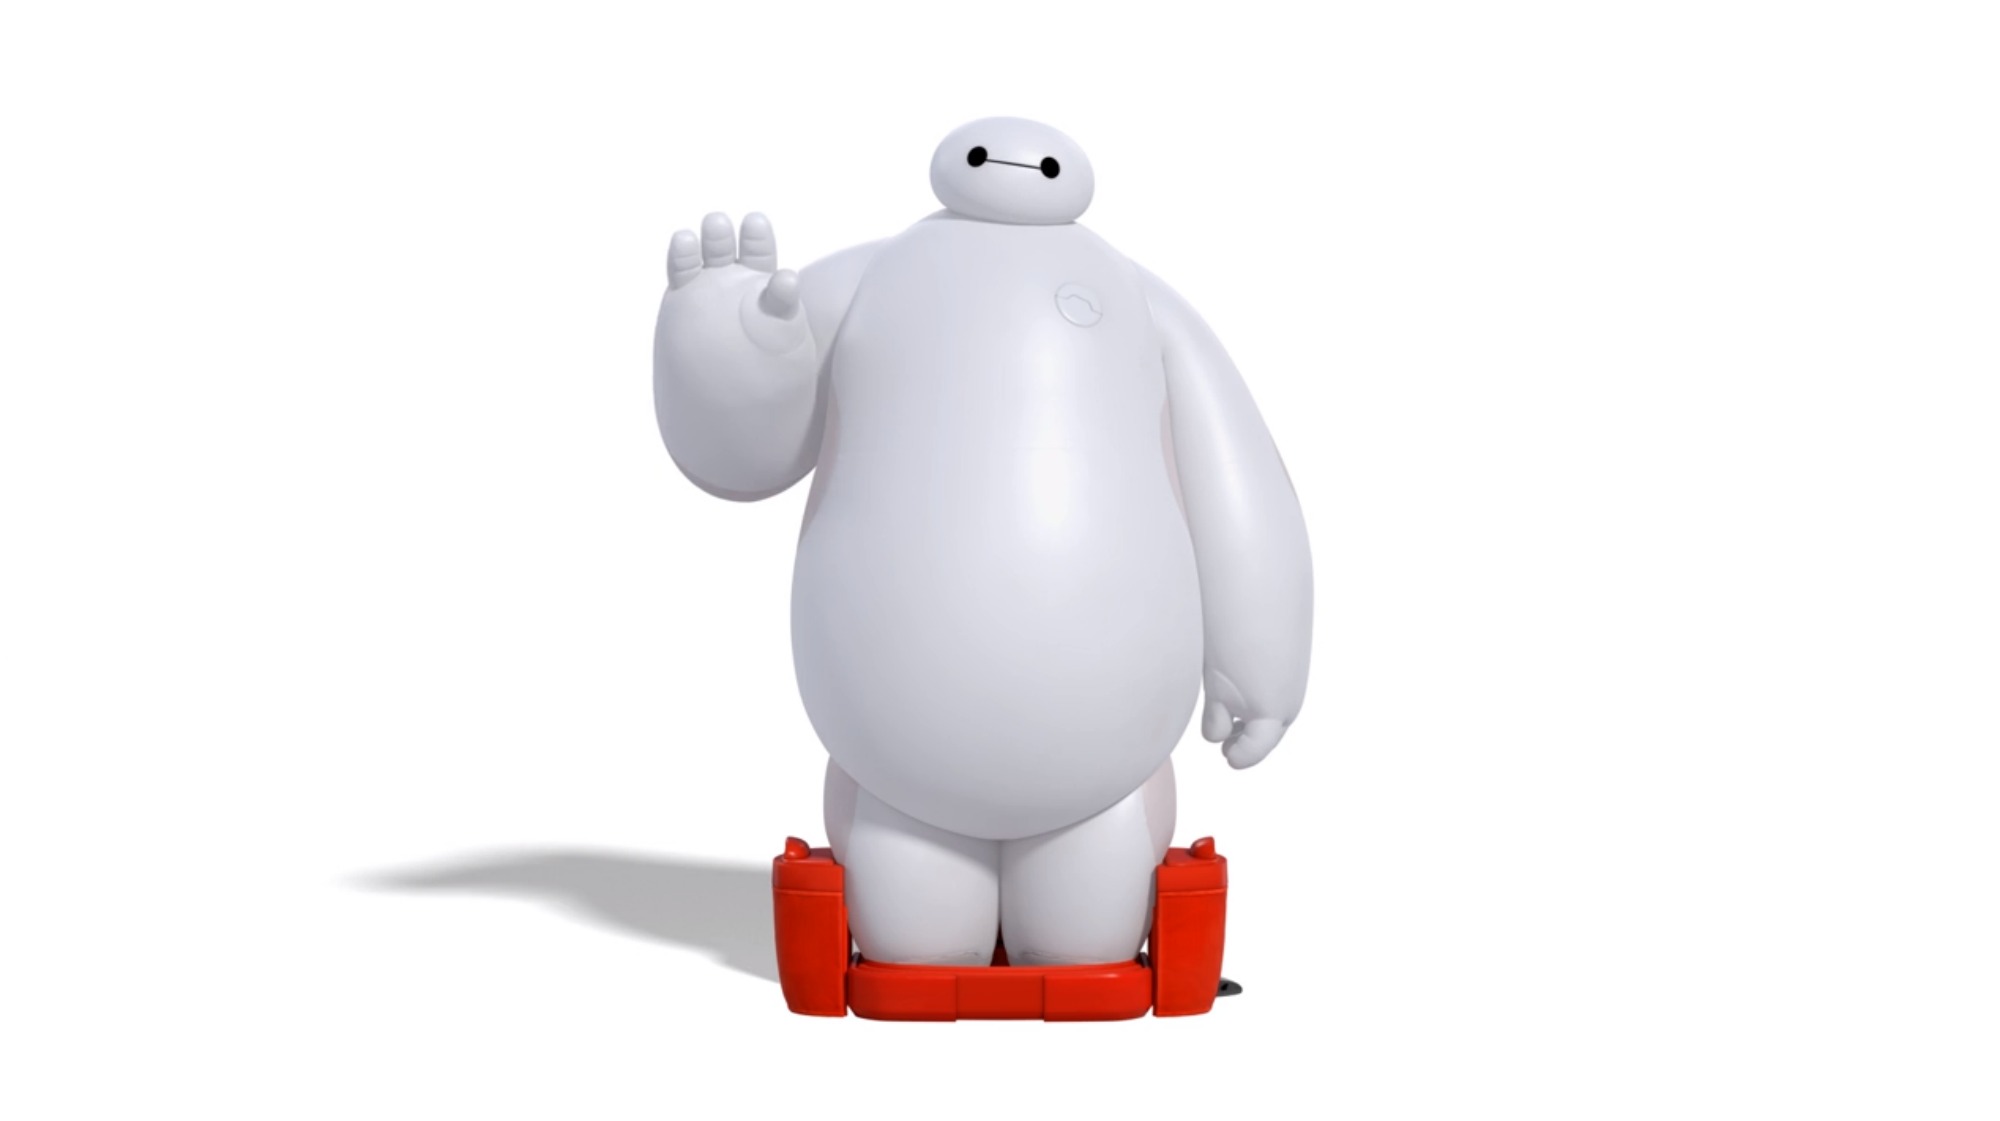 90+ Big Hero 6 HD Wallpapers and Backgrounds